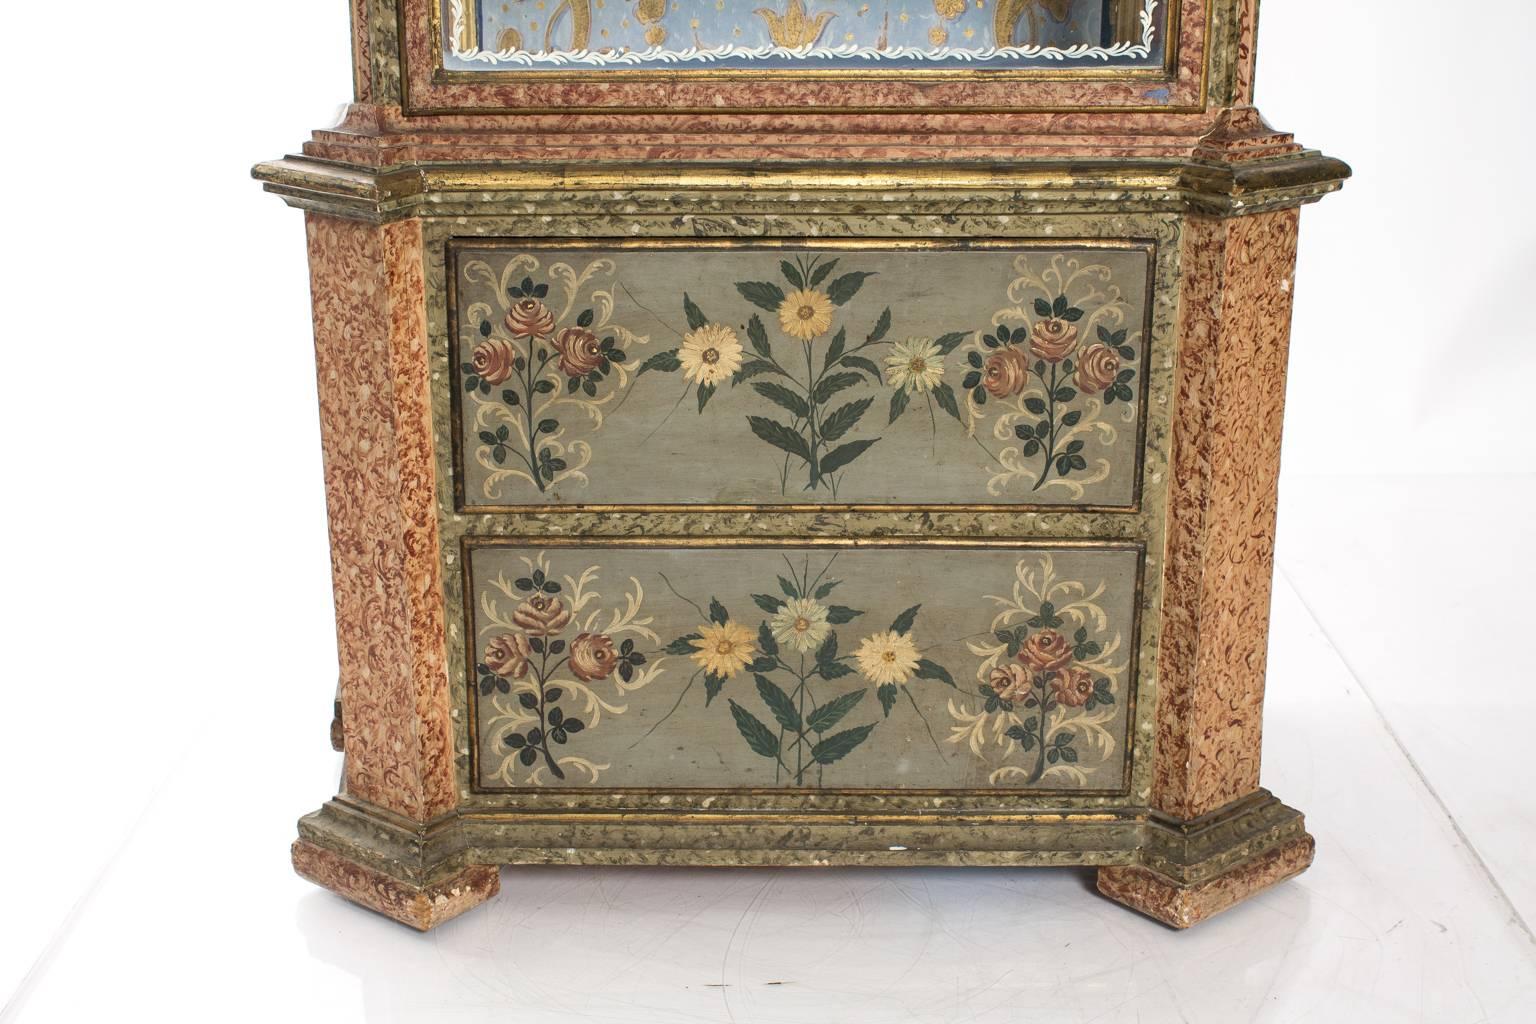 19th century Venetian decorated and glazed display cabinet, adorned with arched top and gilded carvings.